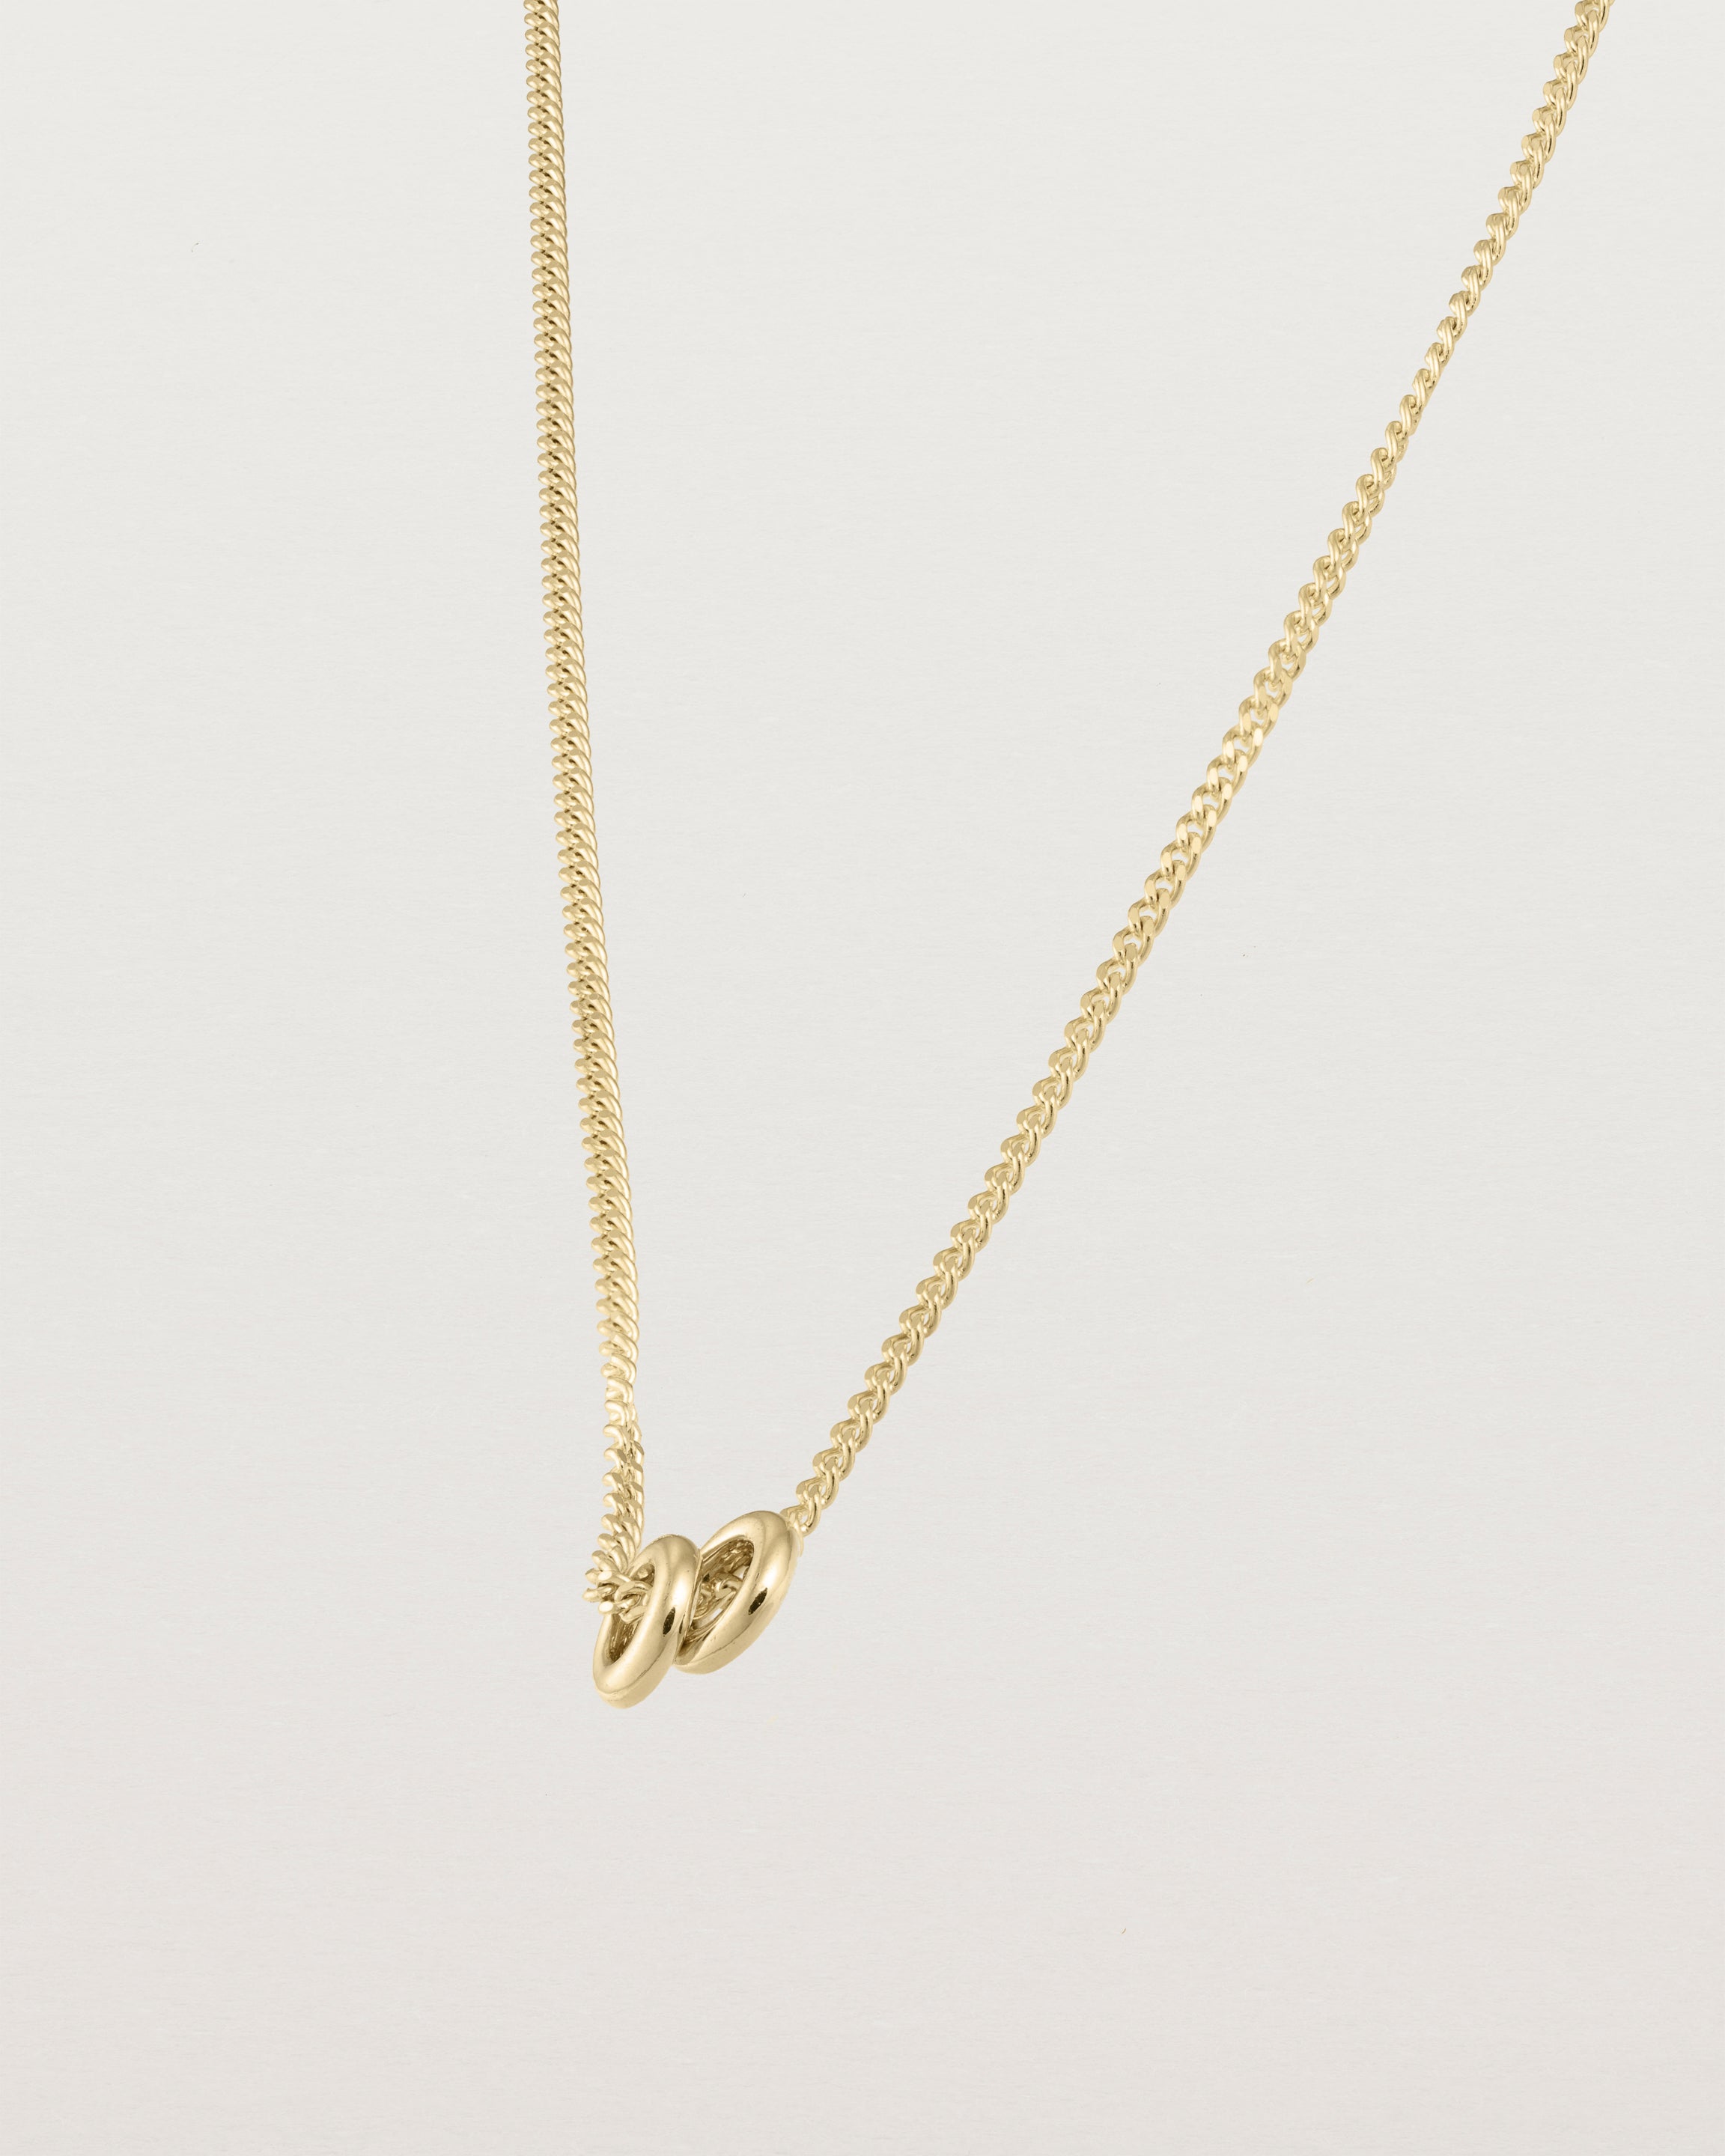 Aether necklace showing two round charms in yellow gold